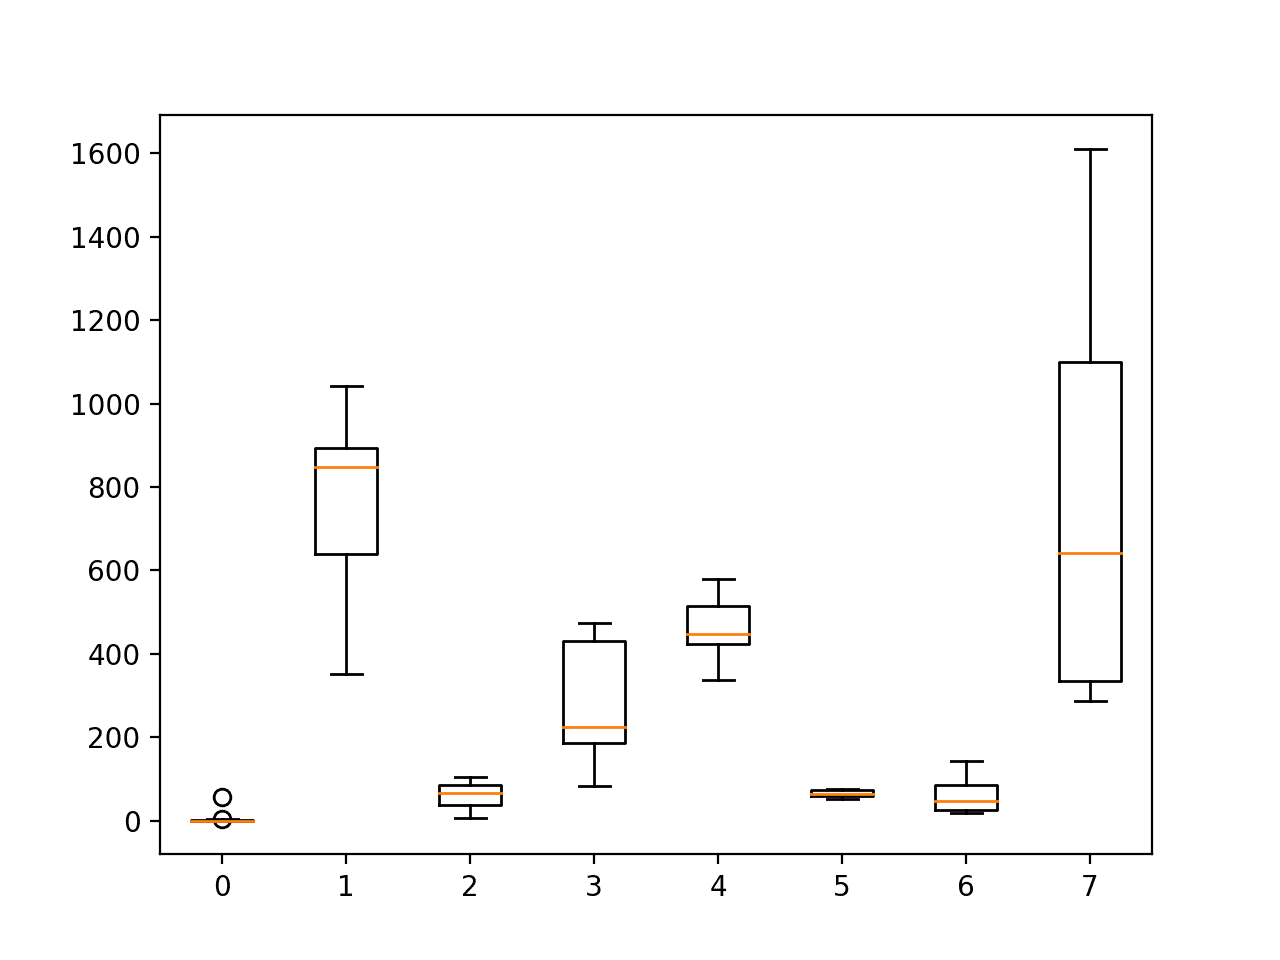 Boxplot of the distribution of activity durations per subject